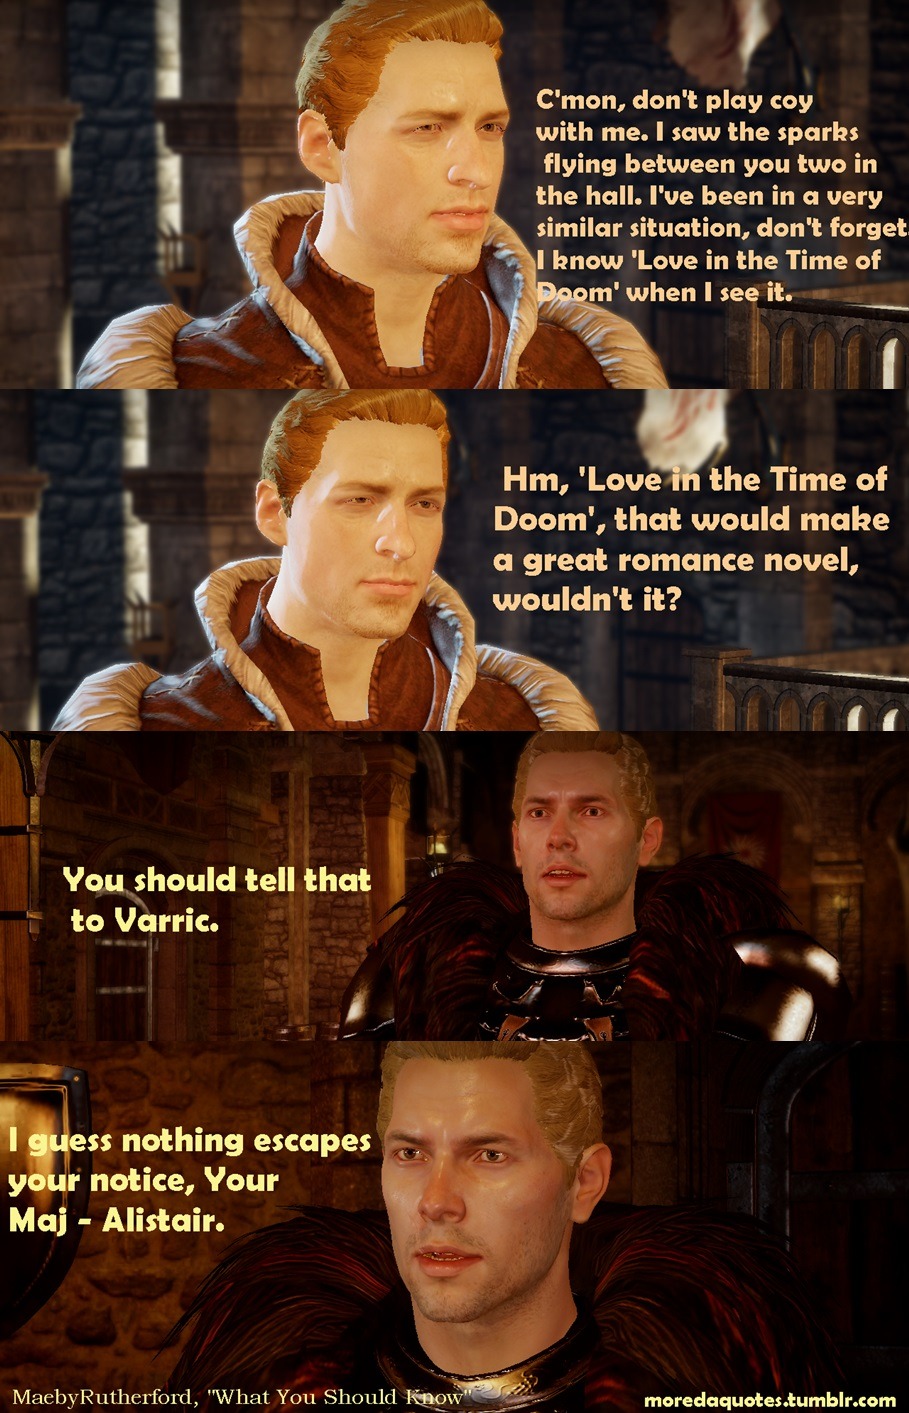 From Alistair to Cullen—Fairytale Romances and Dragon Age - The Fandomentals